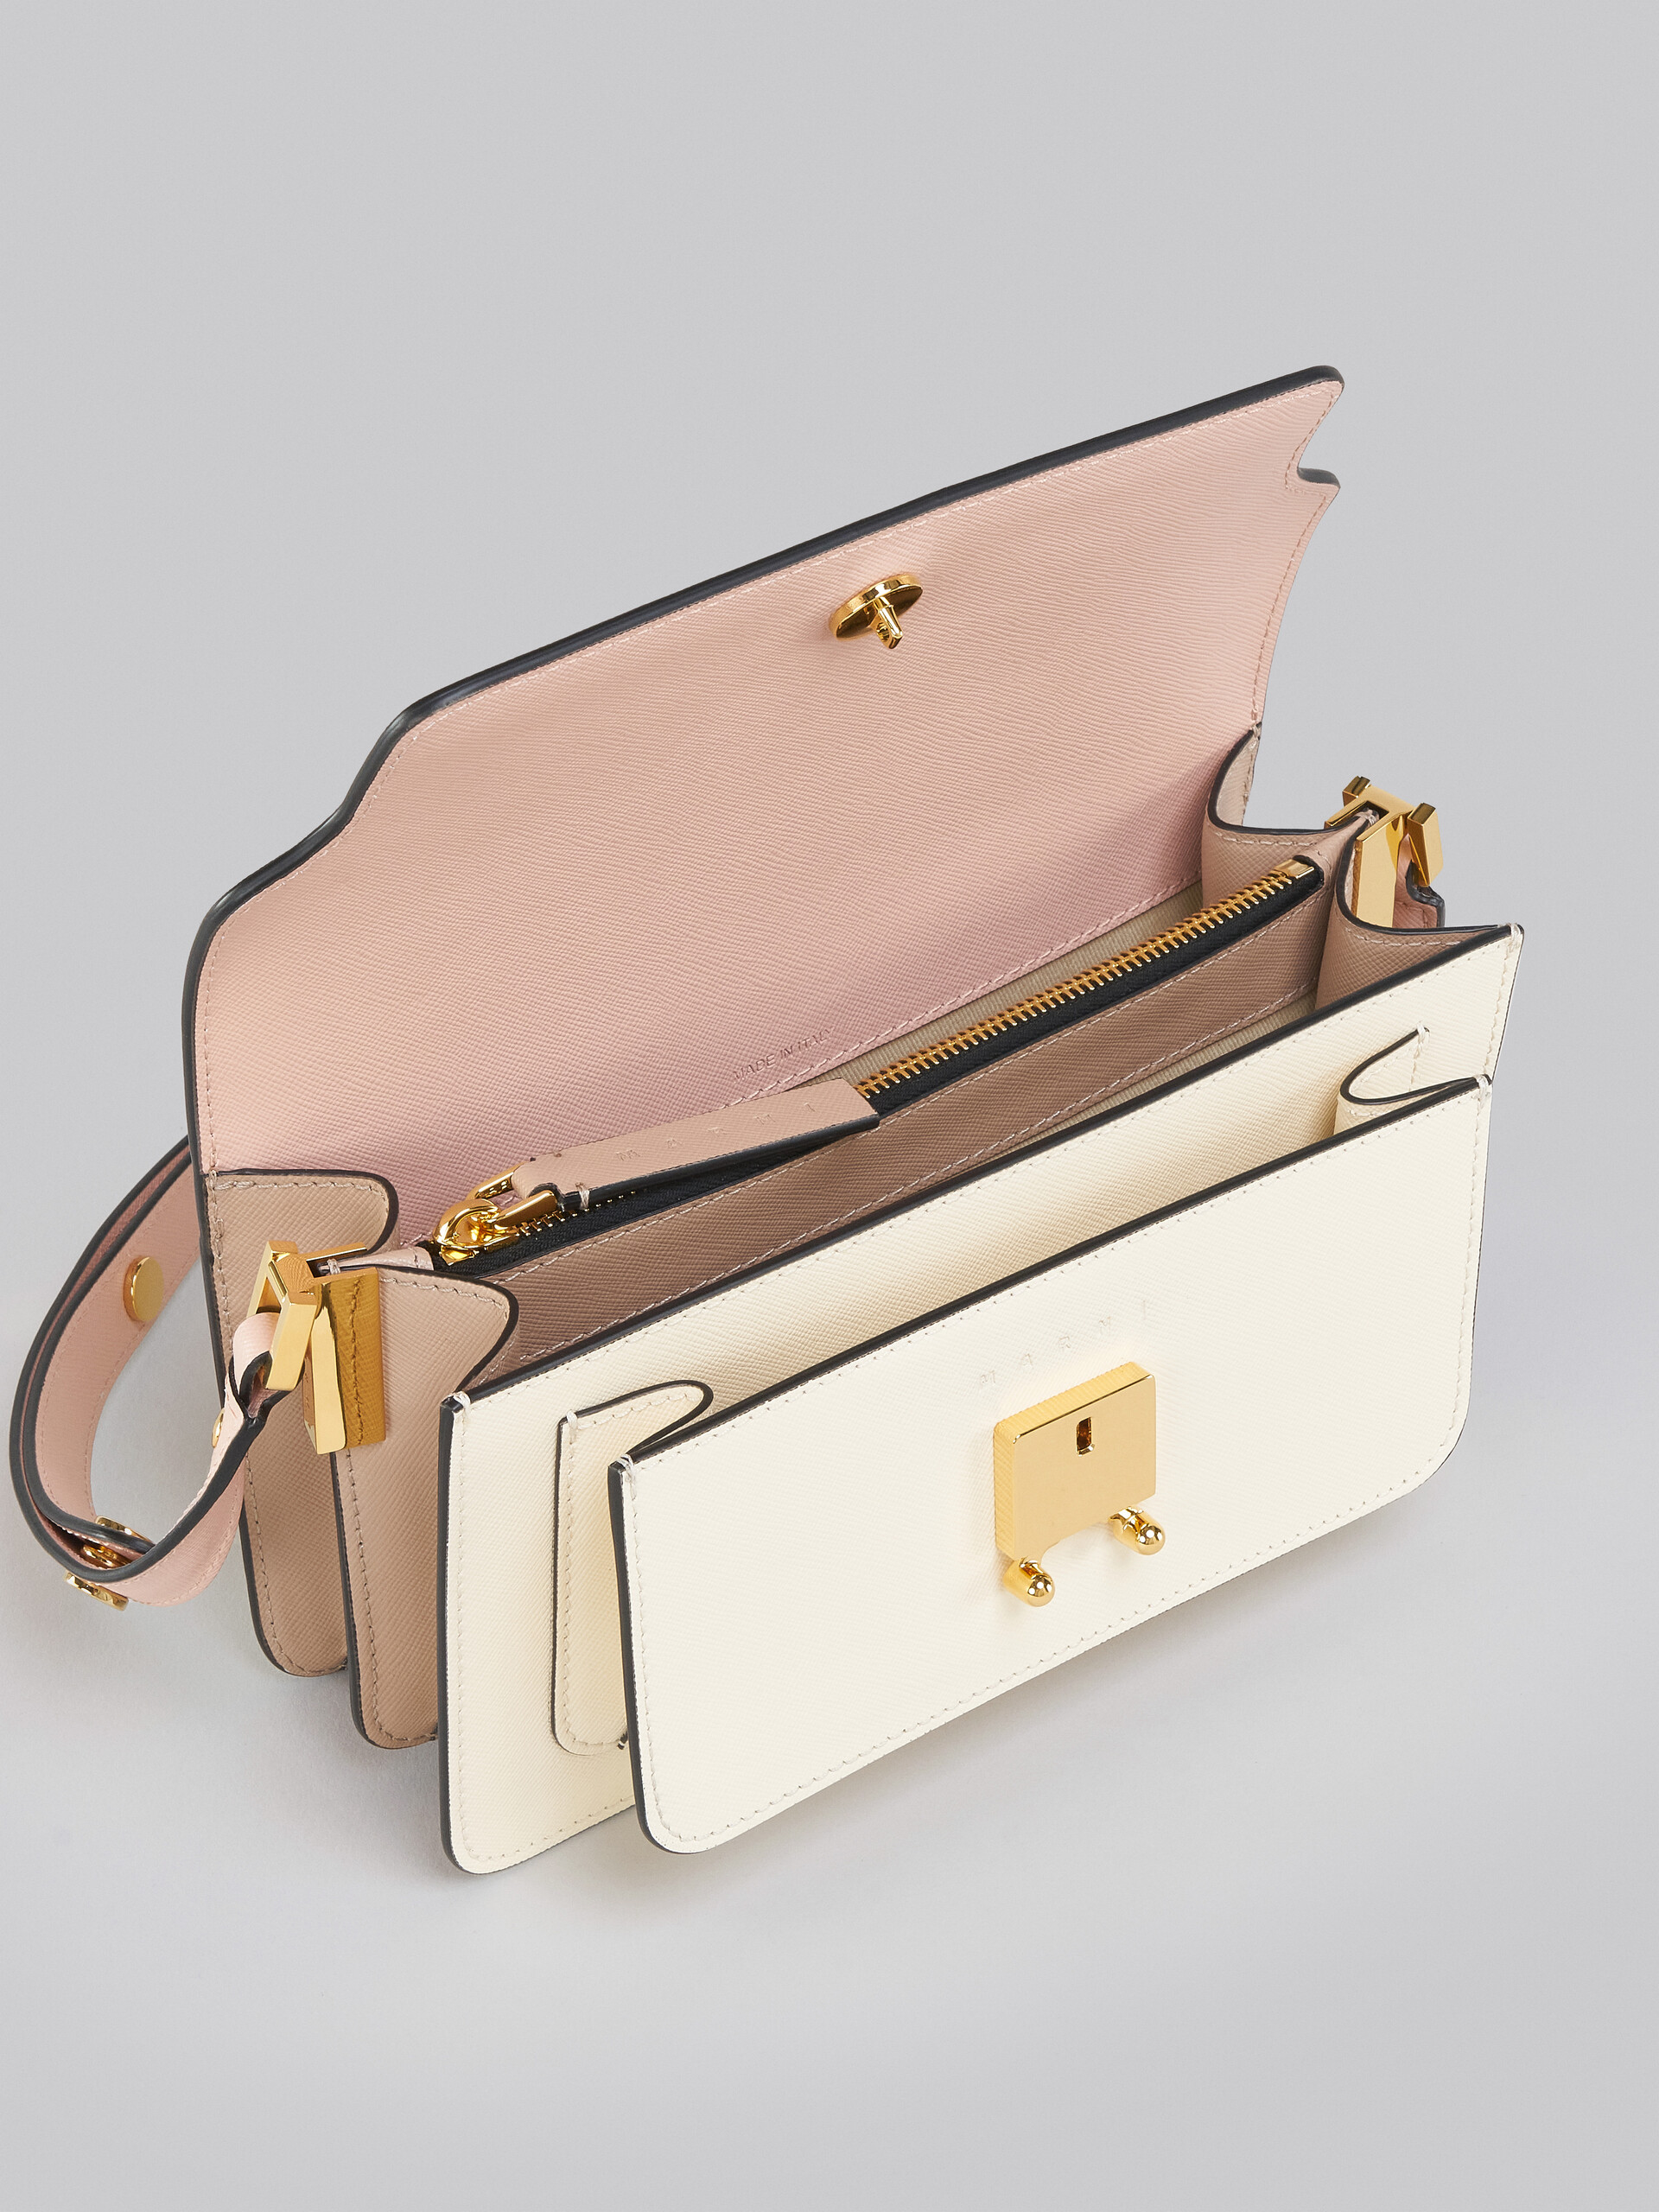 Trunk Bag E/W in pink and white saffiano leather - Shoulder Bag - Image 4